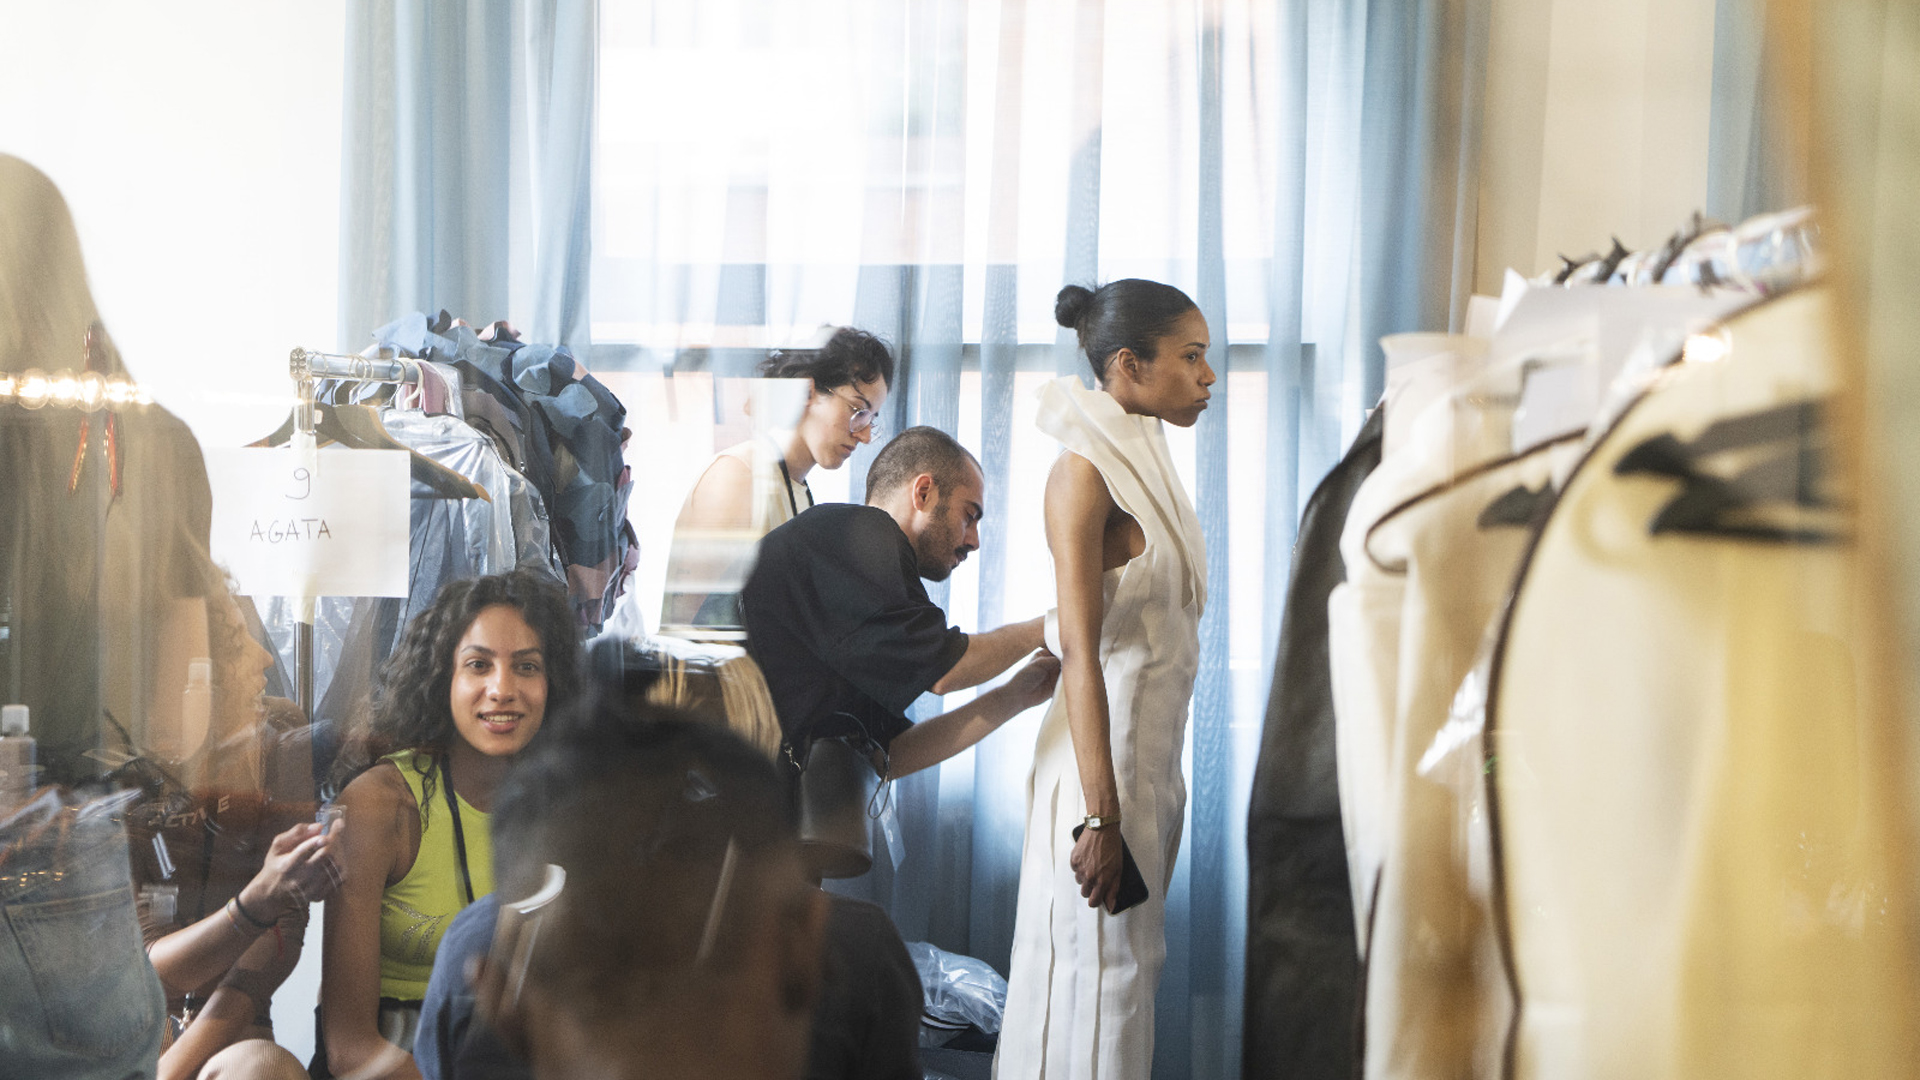 Backstage, designers making the fitting